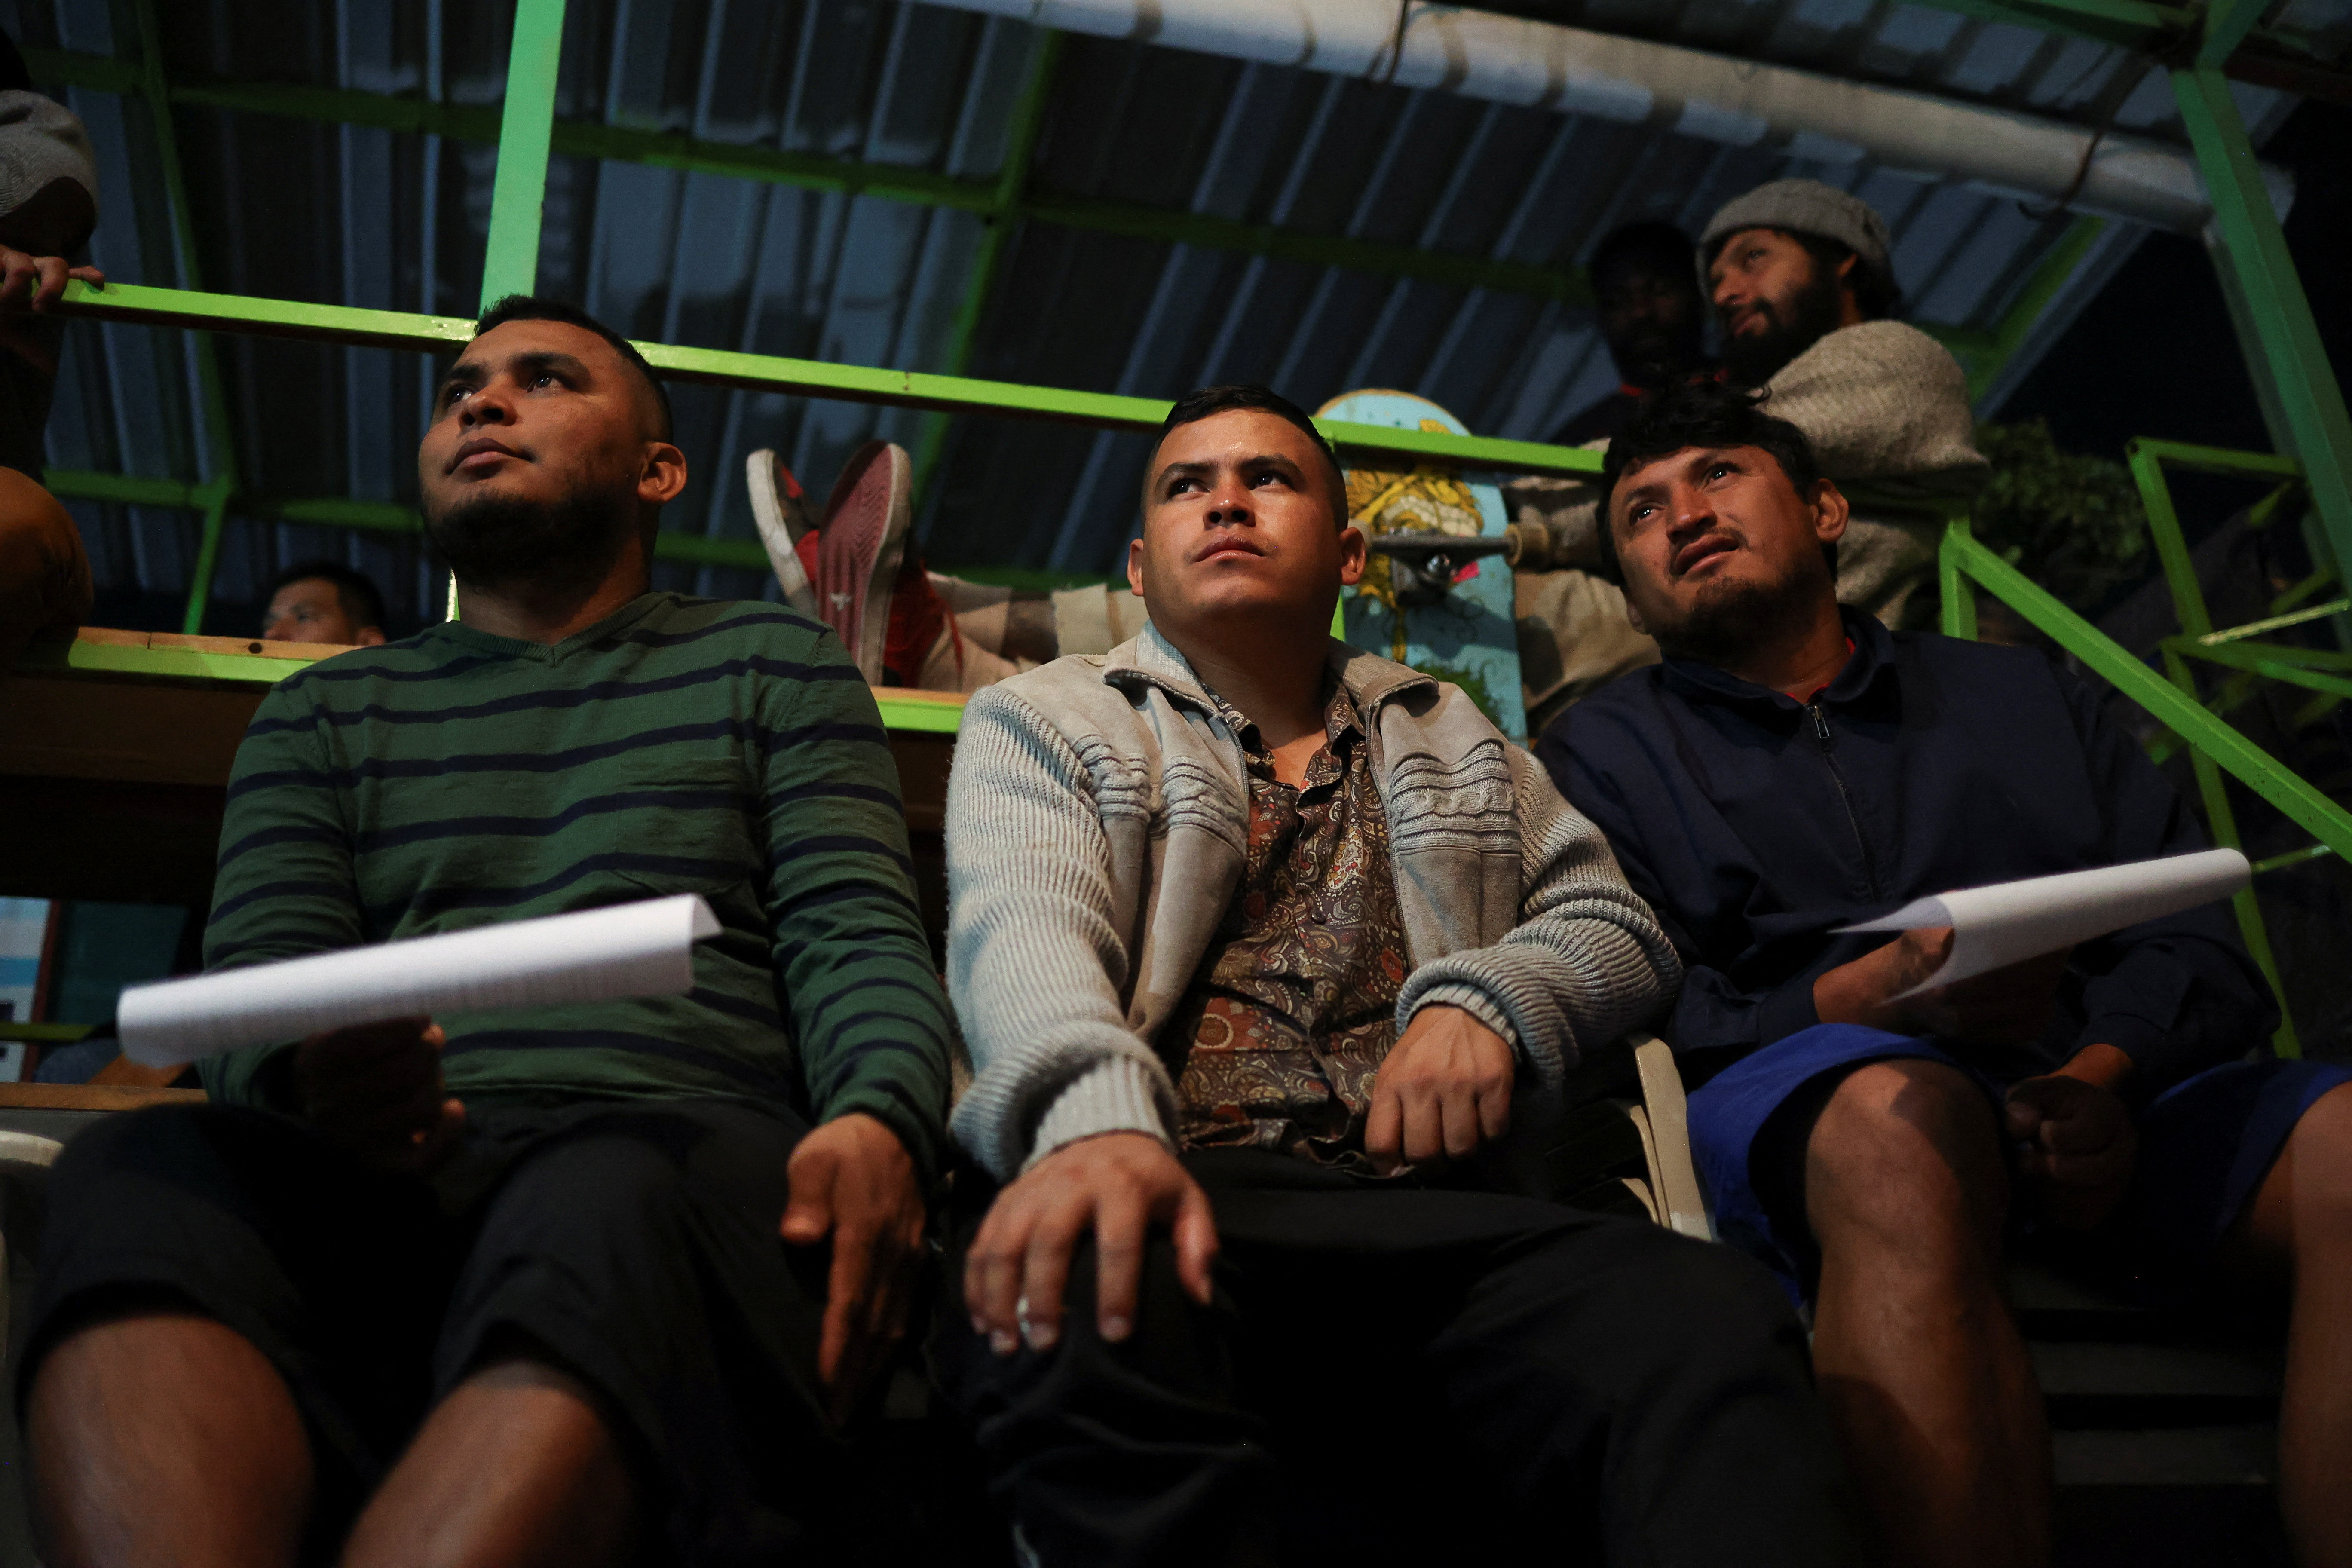 Migrants gather at a shelter during the Christmas festivities in Mexico City